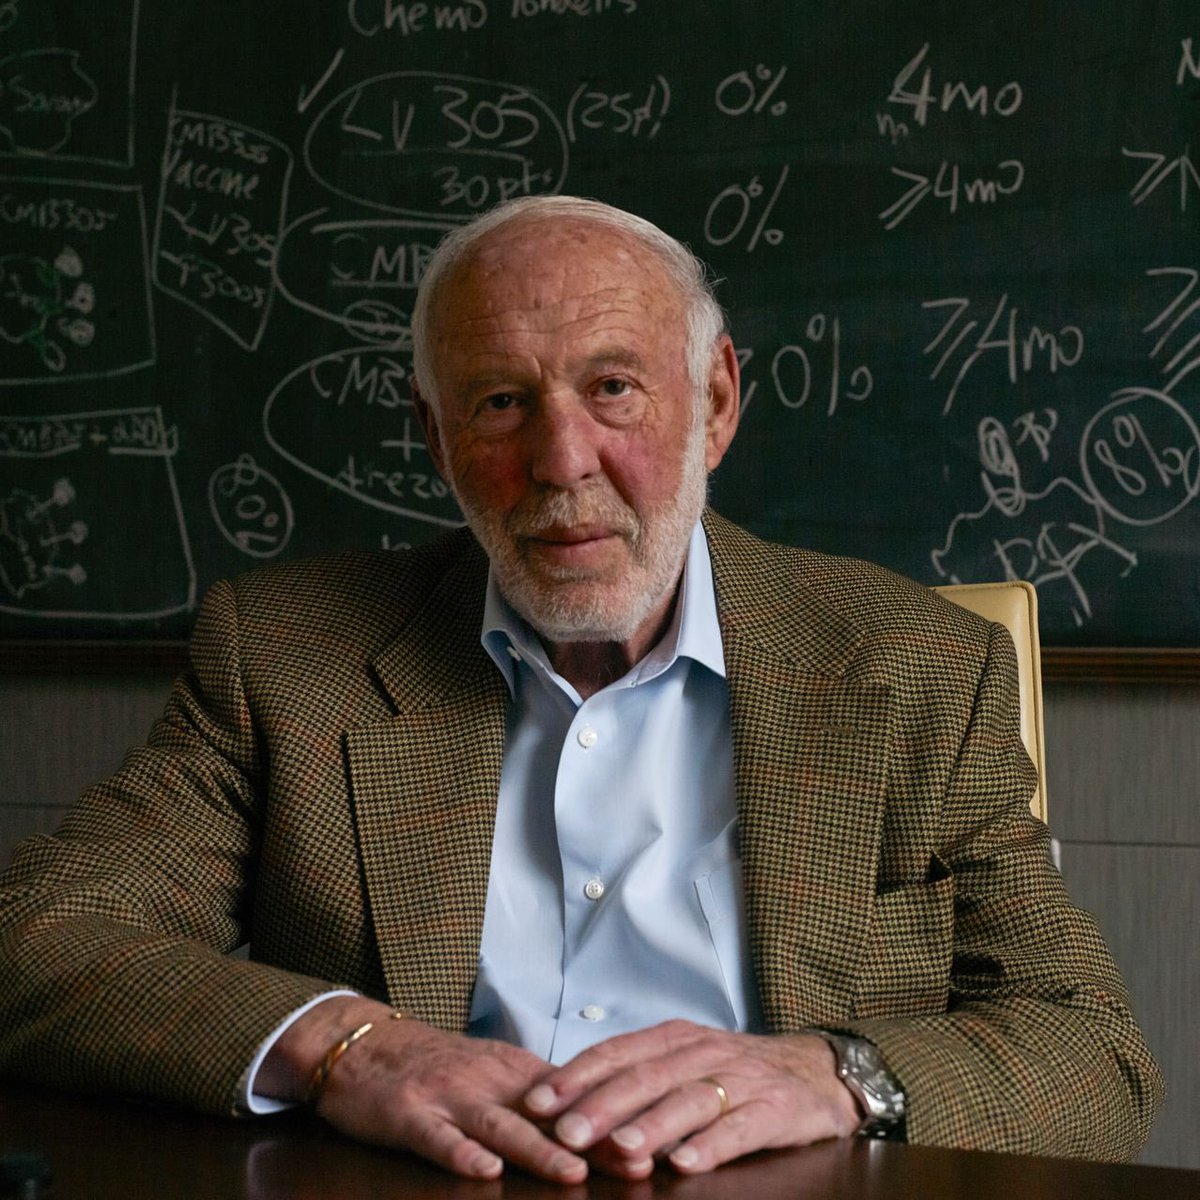 ICTP joins the scientific community in mourning the passing of mathematician, investor and philanthropist Jim Simons. A staunch supporter of fundamental research, he contributed to funding key programmes at ICTP, such as the Associates Programme.